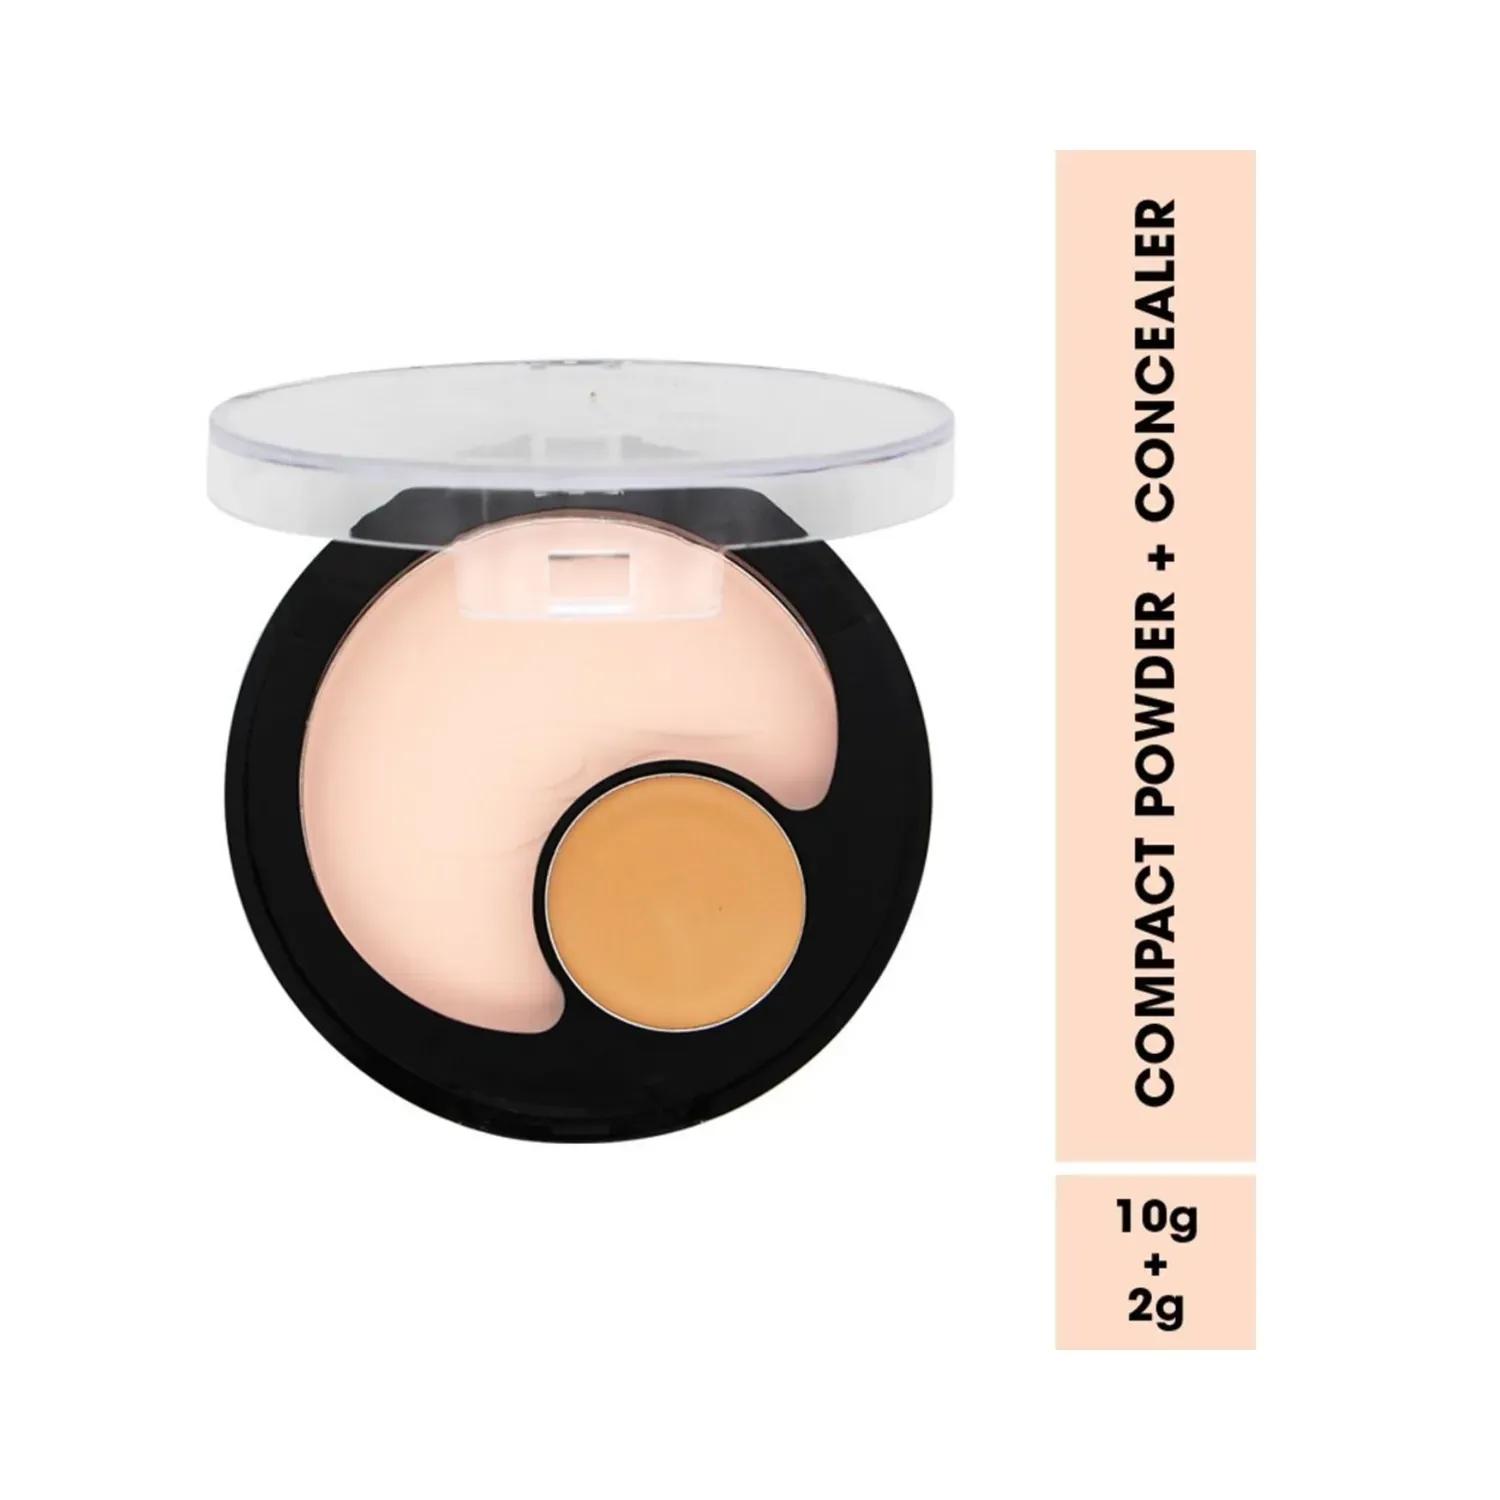 fashion colour 2-in-1 compact powder & concealer - 01 shade (12g)